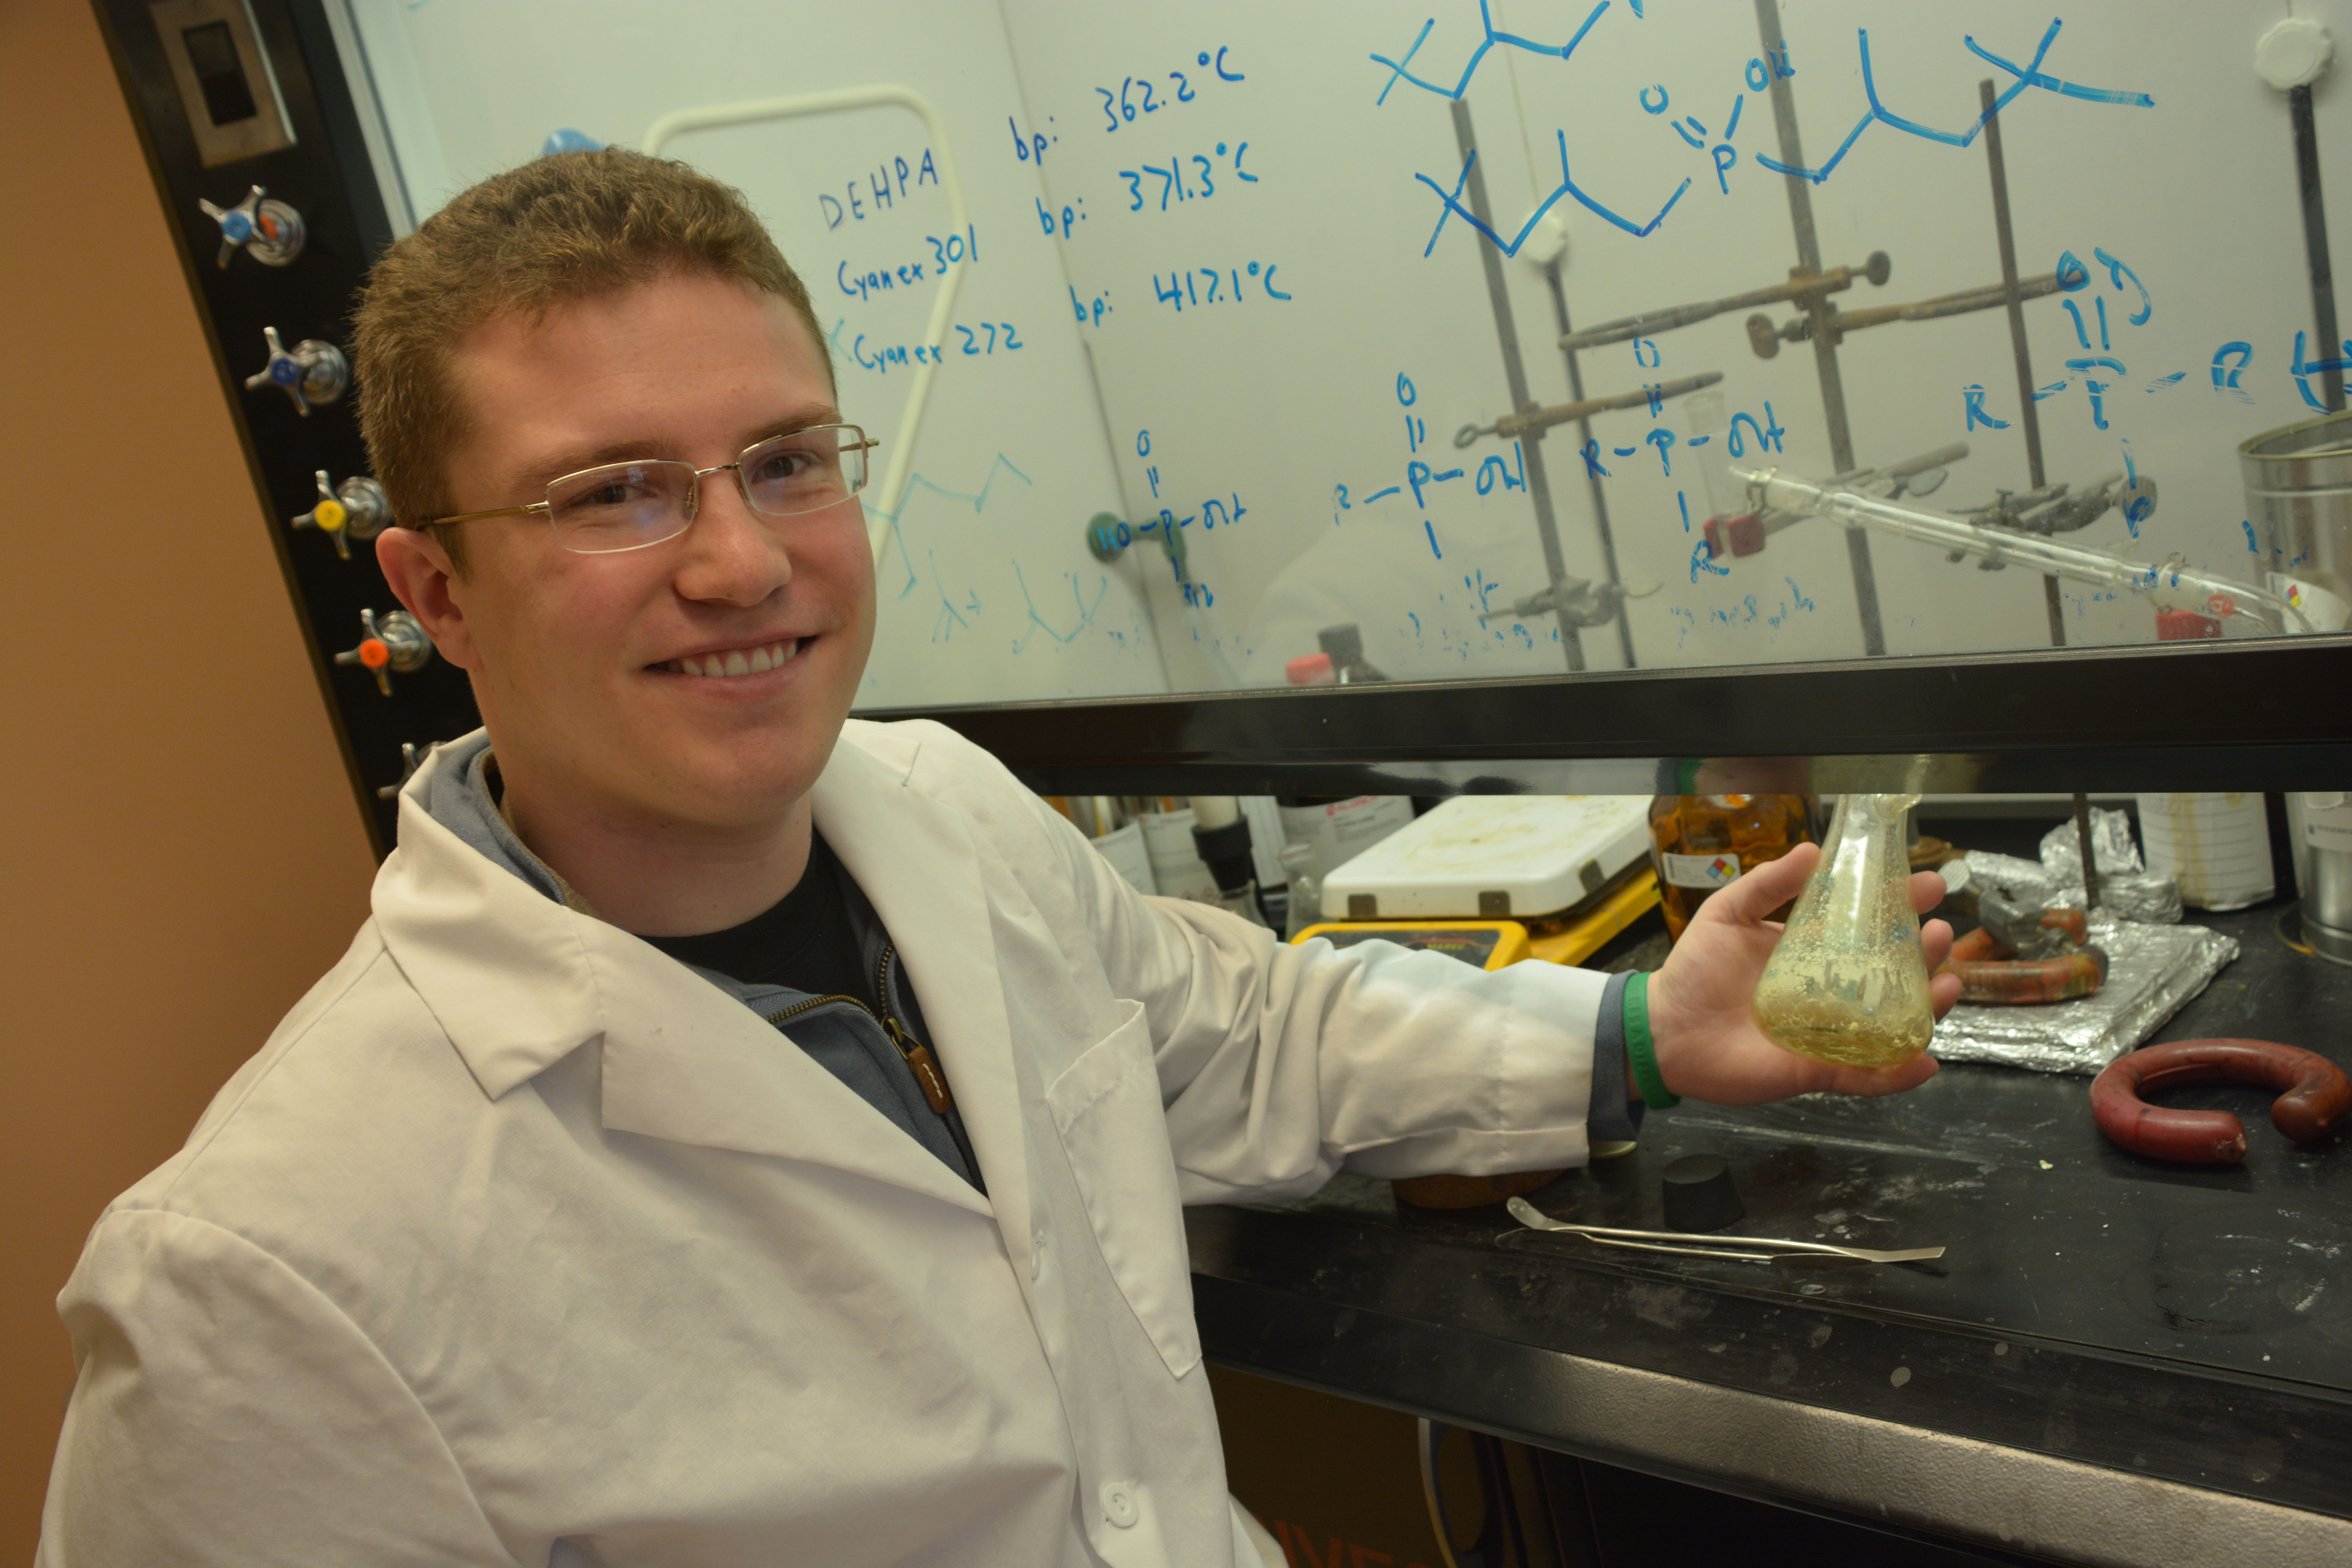 Jesse Hinricher extracts rare earth elements from ores in a chemistry lab at the South Dakota School of Mines & Technology.